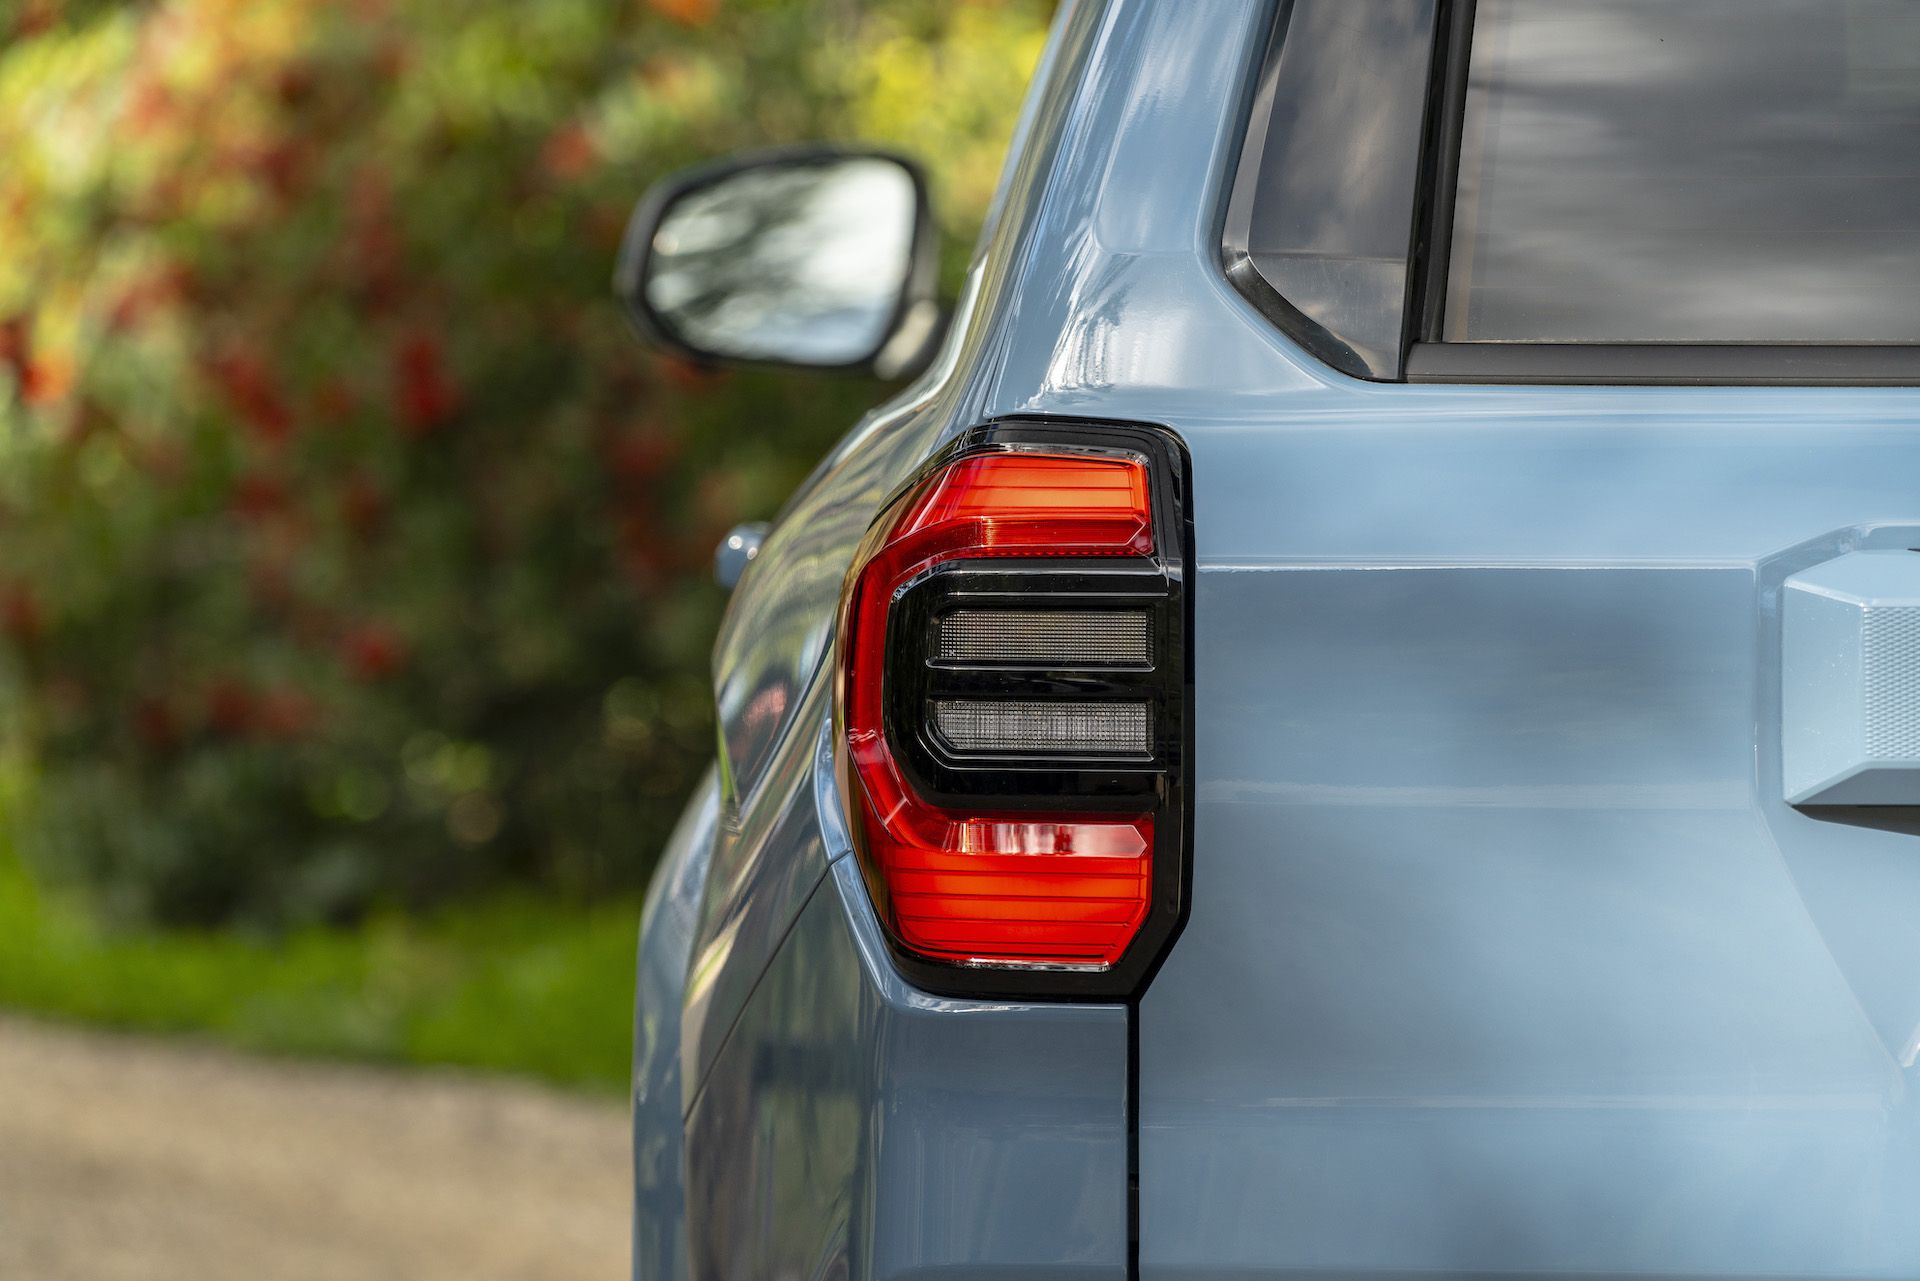 2025 Toyota 4runner Photos: 2025 4Runner LIMITED (Interior, Cargo Space, Exterior) in Heritage Blue color 2025-toyota-4runner-limited-109-jpg-66156208d19ff